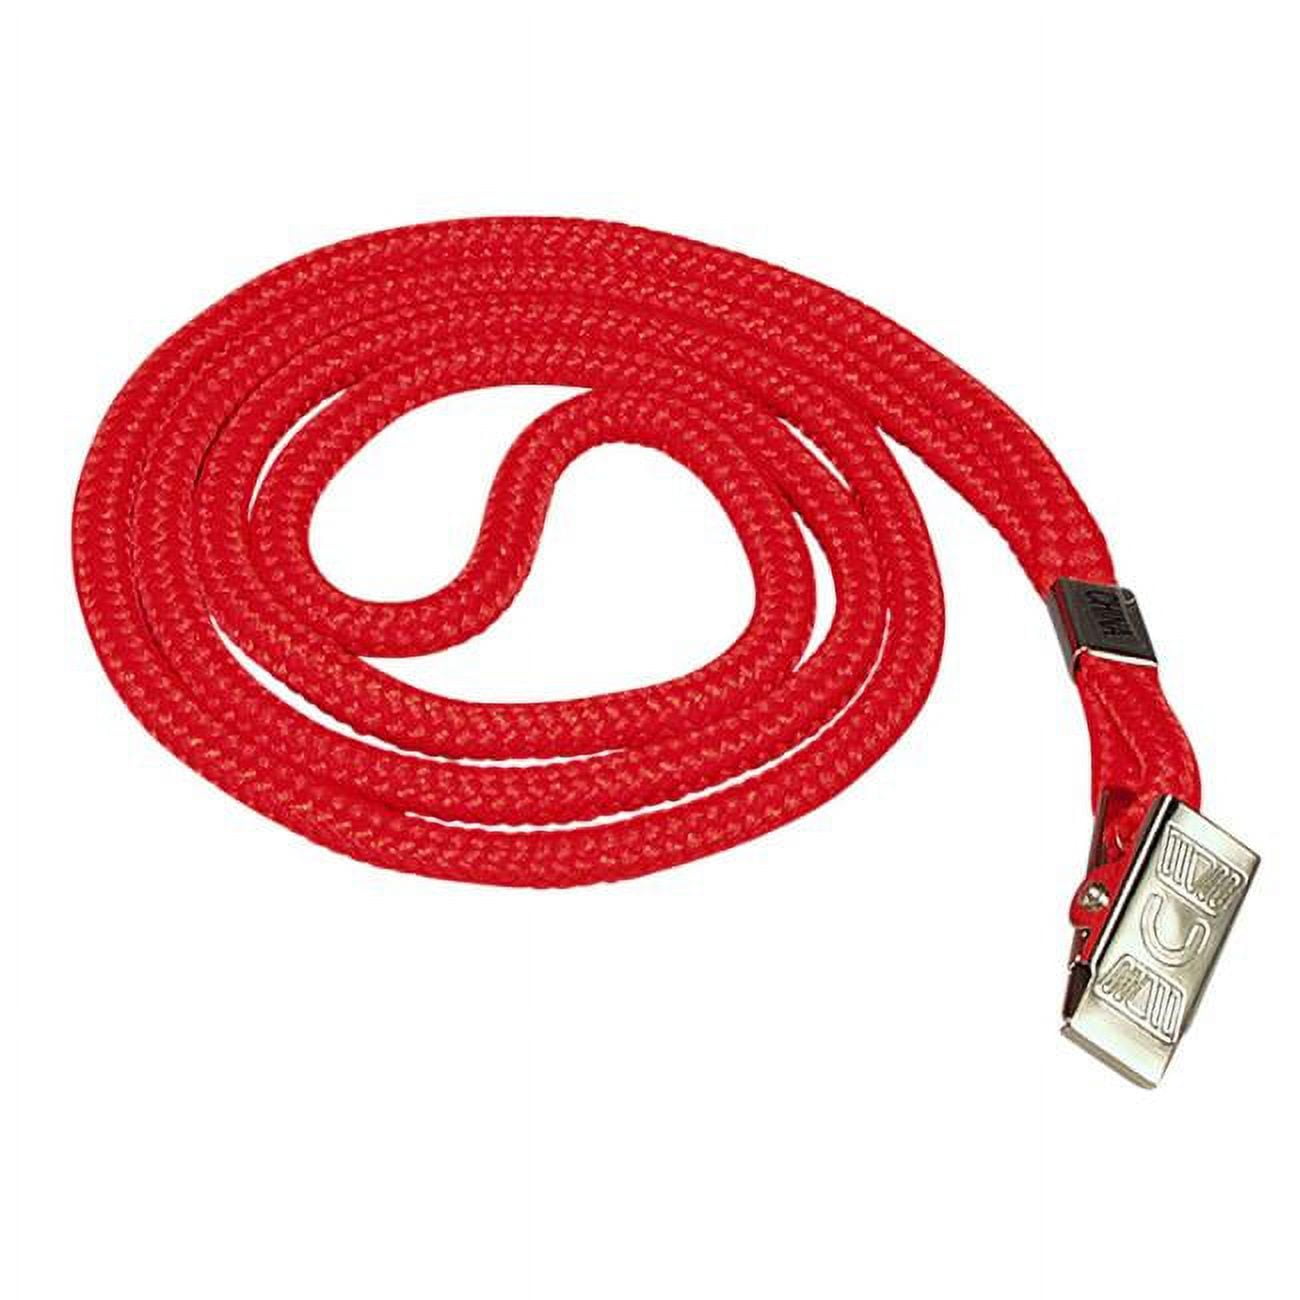 Standard Lanyard Clip Rope Style Red (69402)